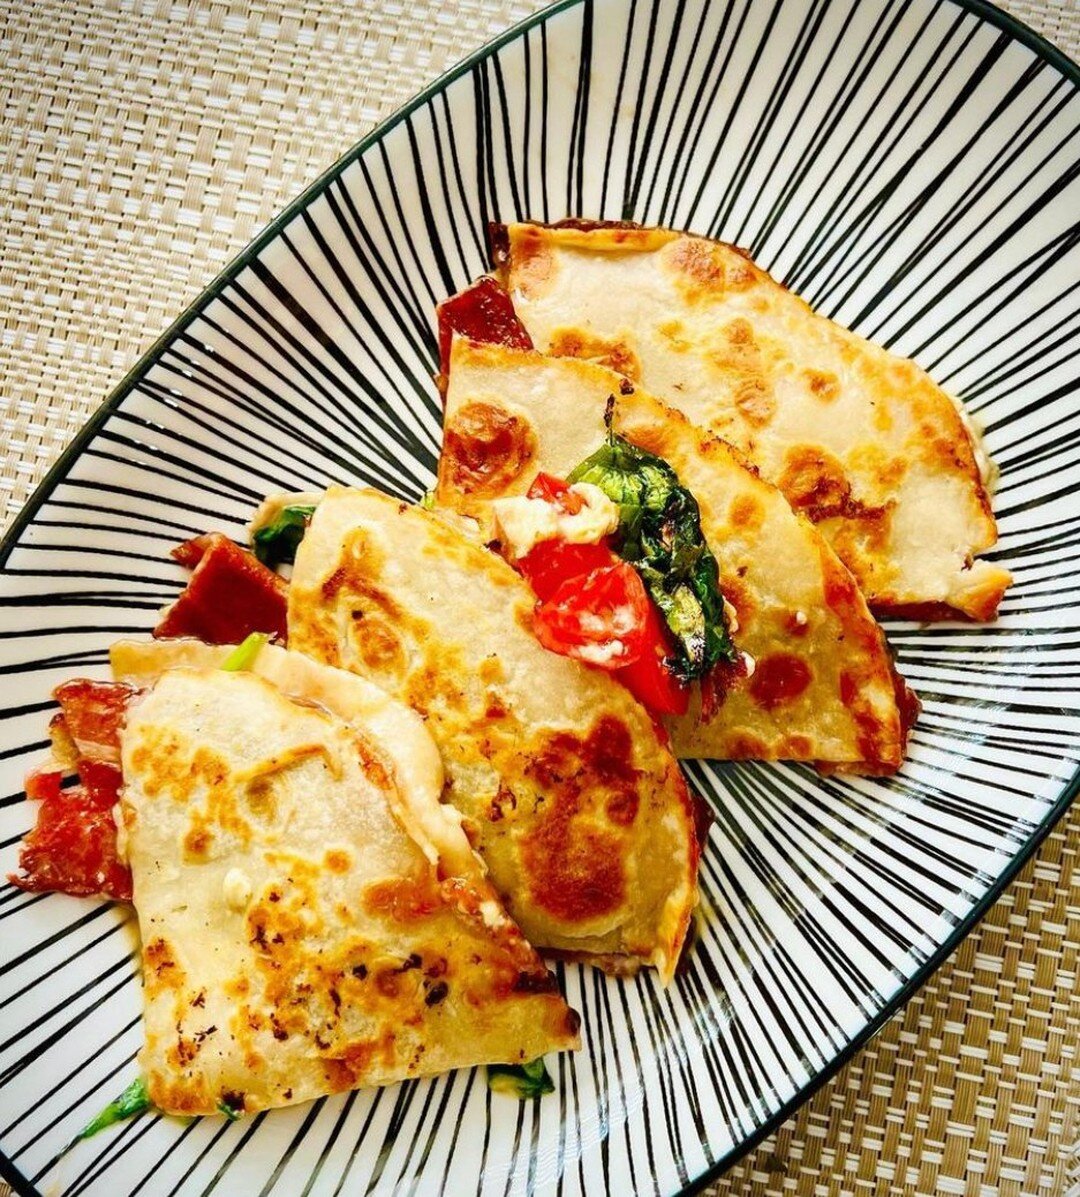 Toasted flat bread featuring our creamy Truffle Brie, and a bunch of other goodies like tomato, bacon, and spinach..... yes please! 😍🧀🍽 This wonderful creation is by @tiny_tummy_foodie, and we can't wait to try this idea for ourselves!
.
.
Pick up